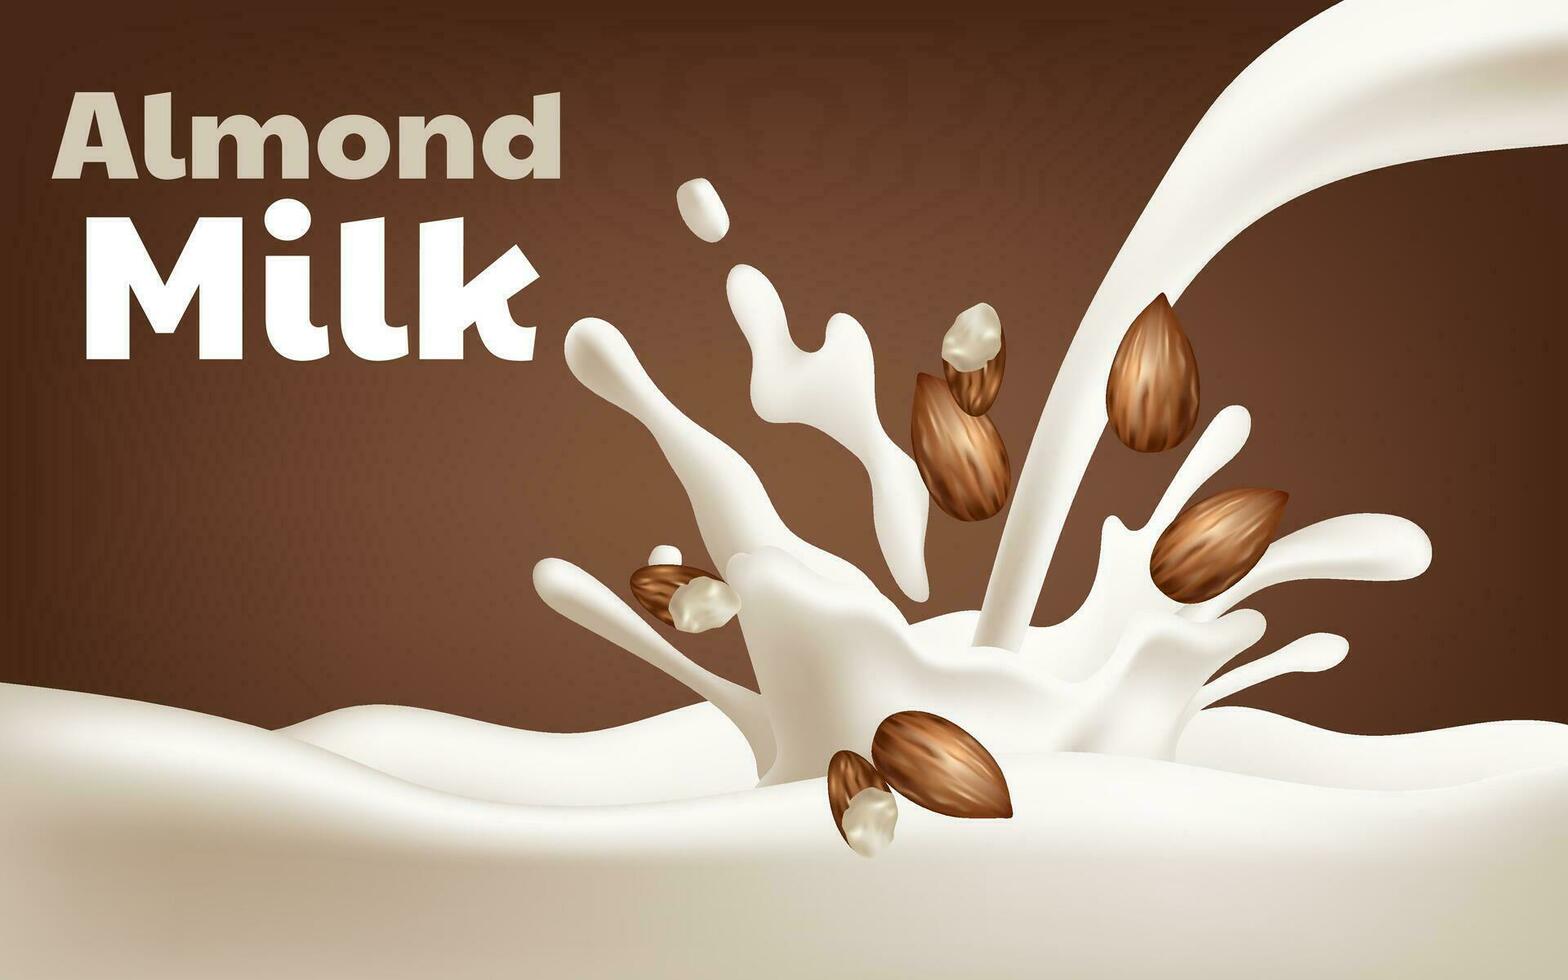 Illustration of fresh almond milk. Realistic dynamic motion of almond milk drops. Ideal for promoting healthy and delicious alternatives in advertisements or packaging. Not AI generated. vector